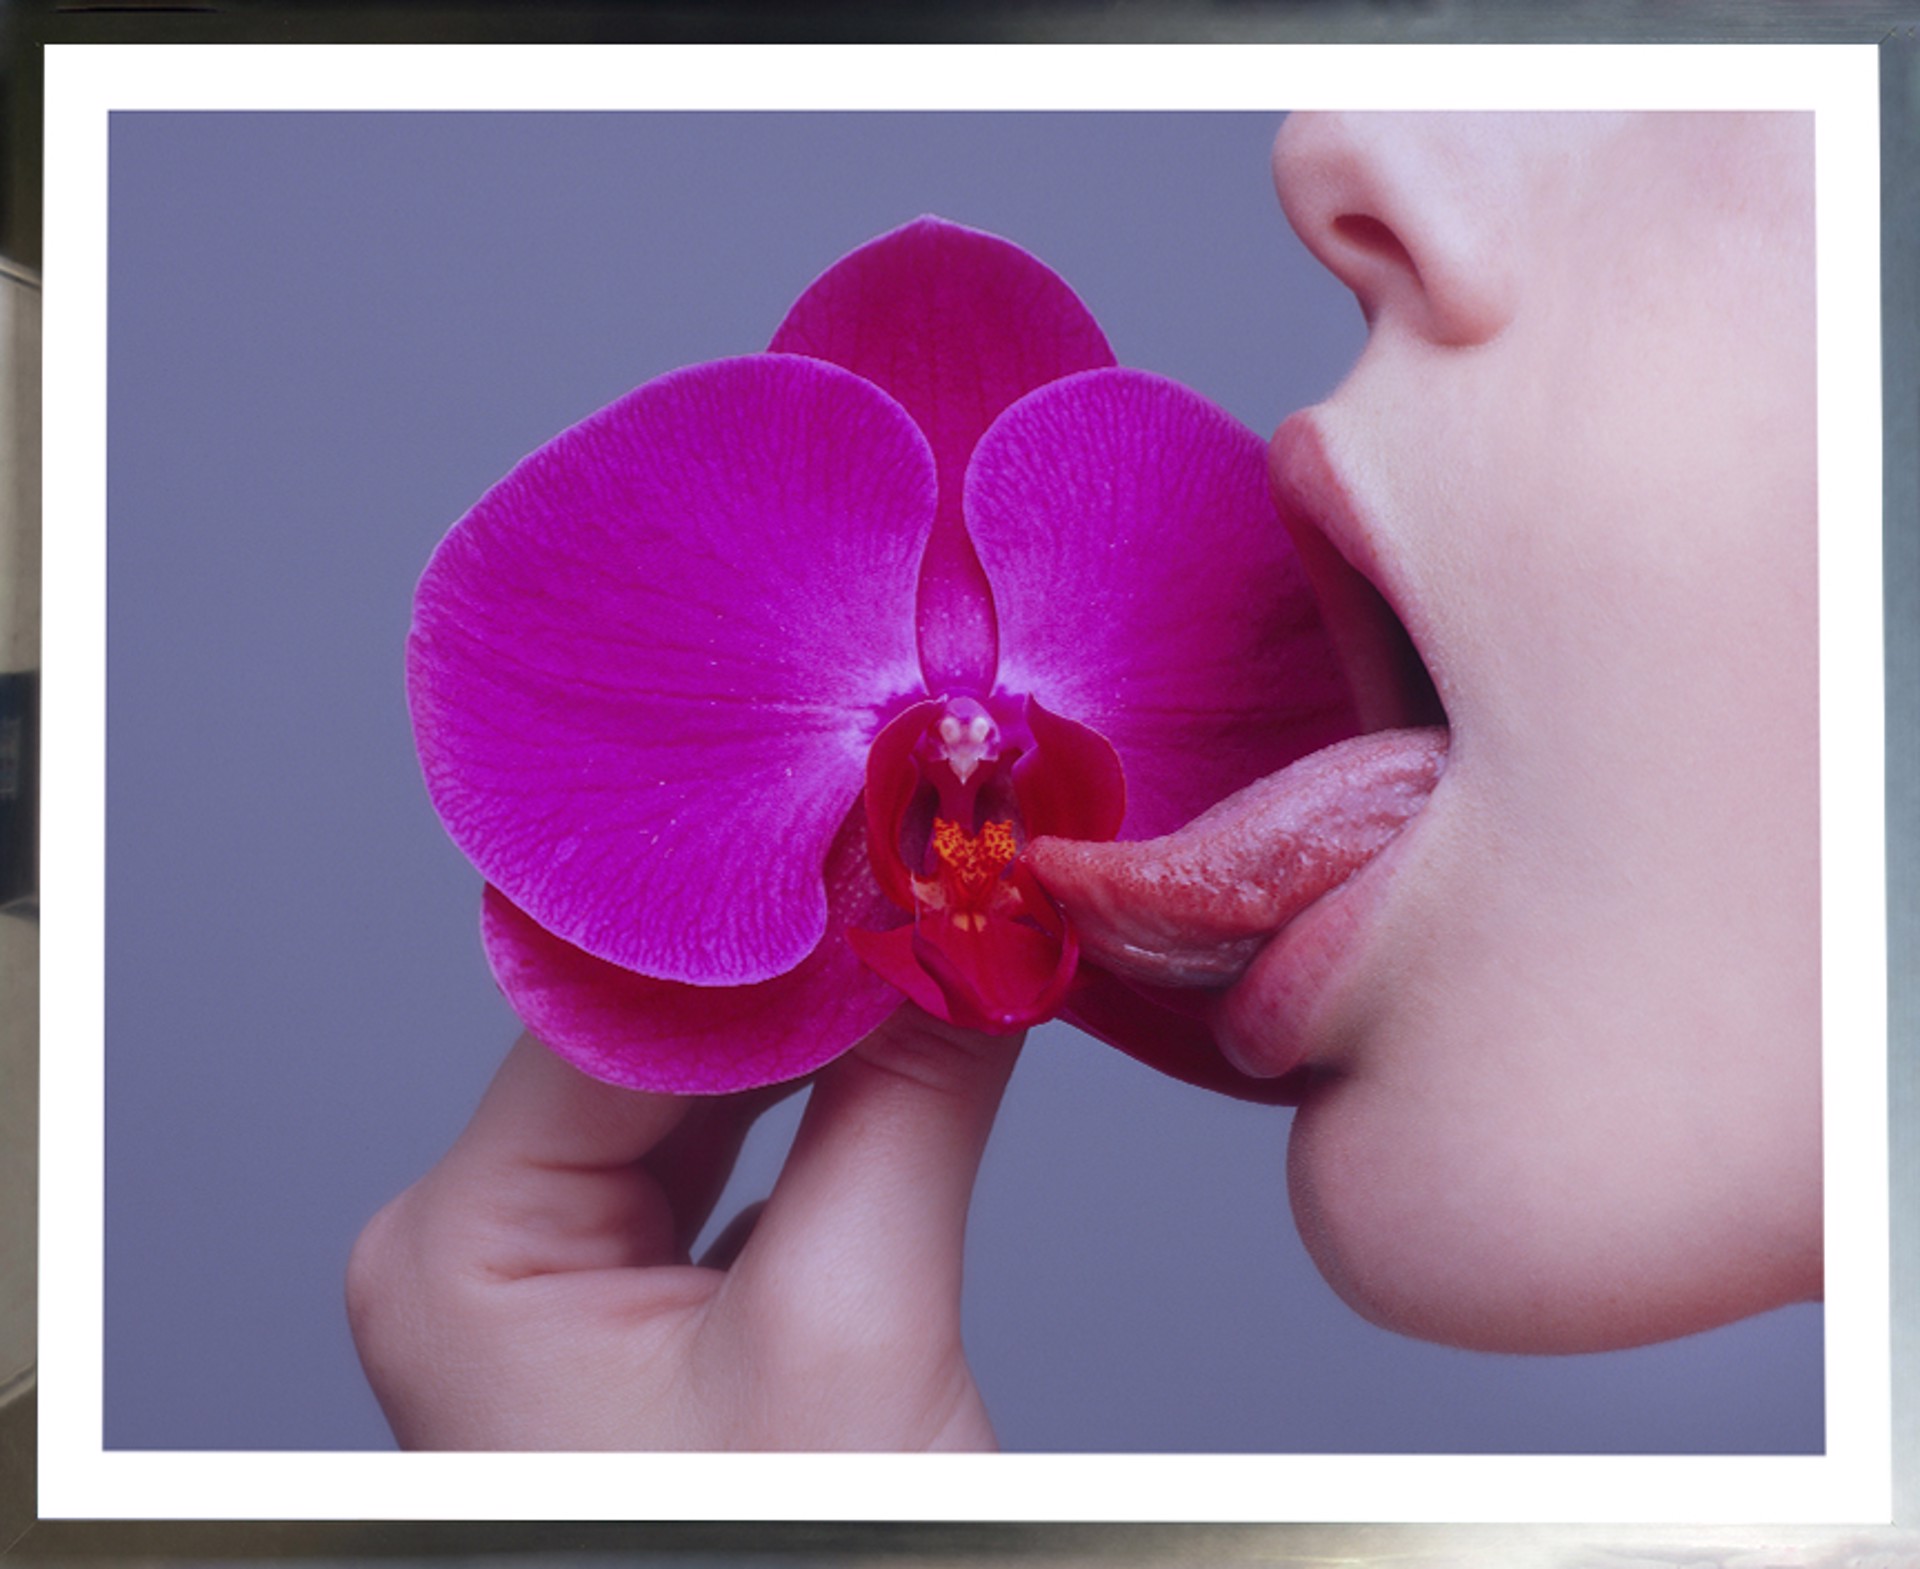 Orchid by Tyler Shields